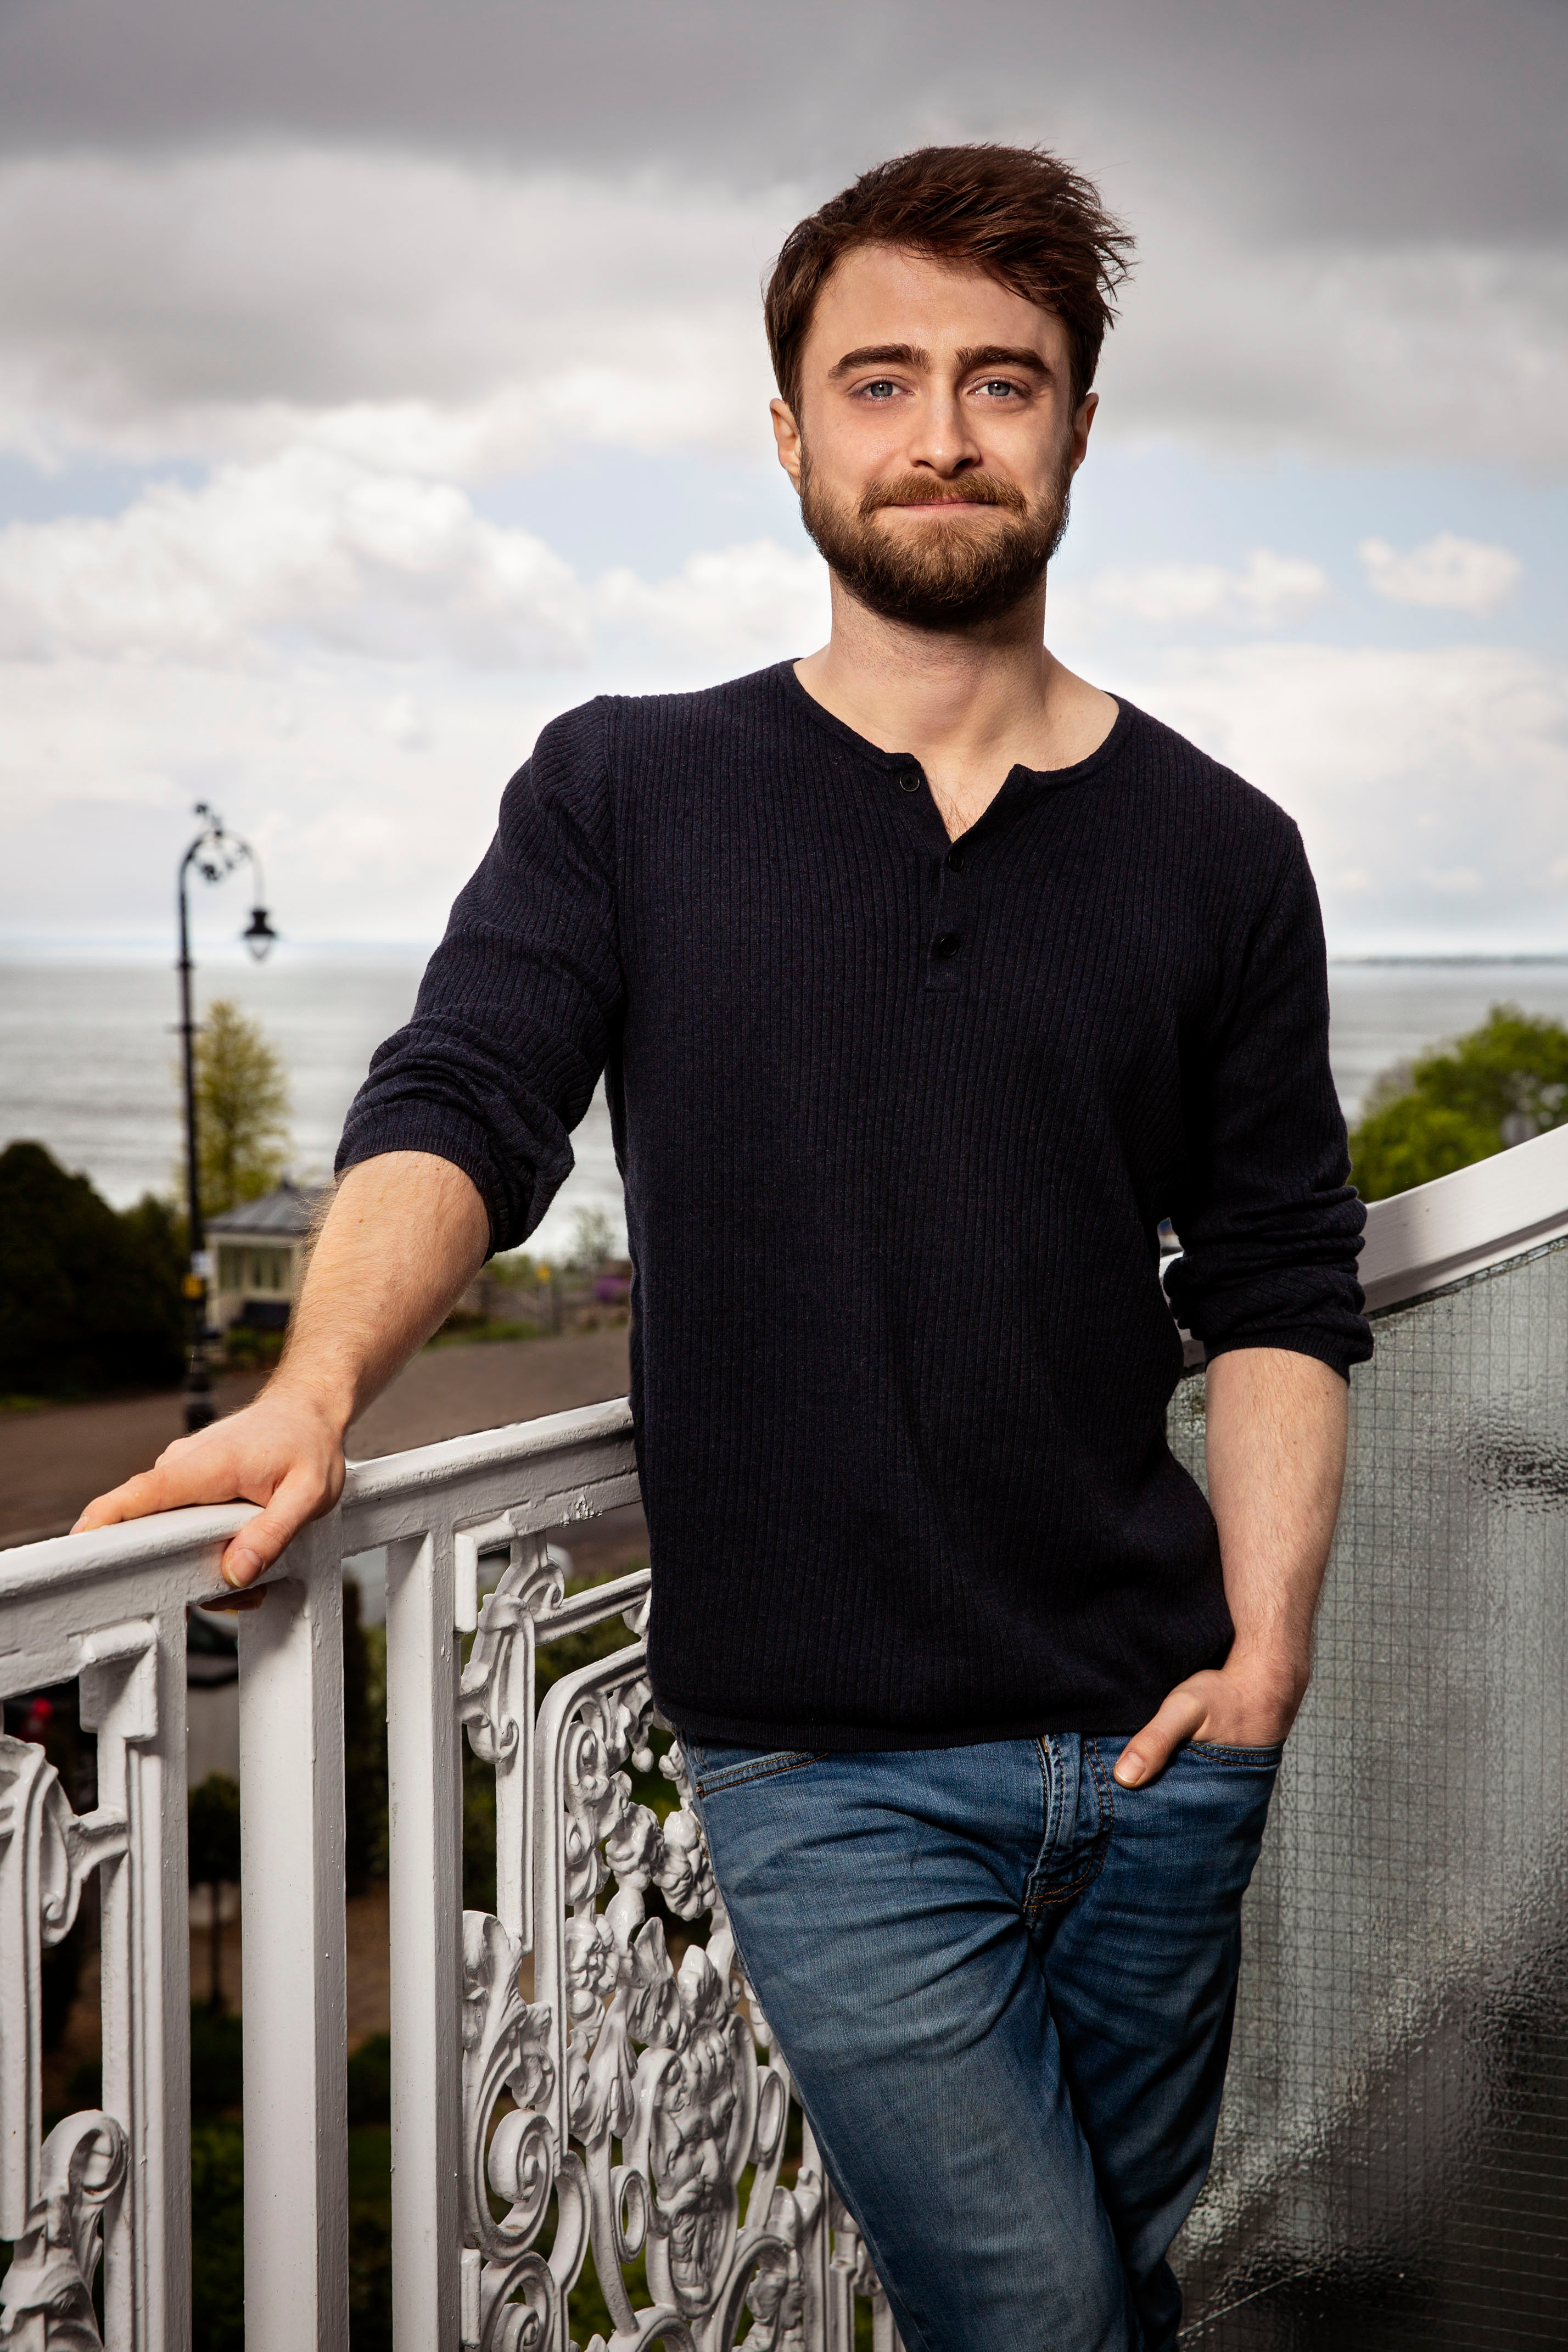 Daniel Radcliffe breaks down reading his great grandfather's